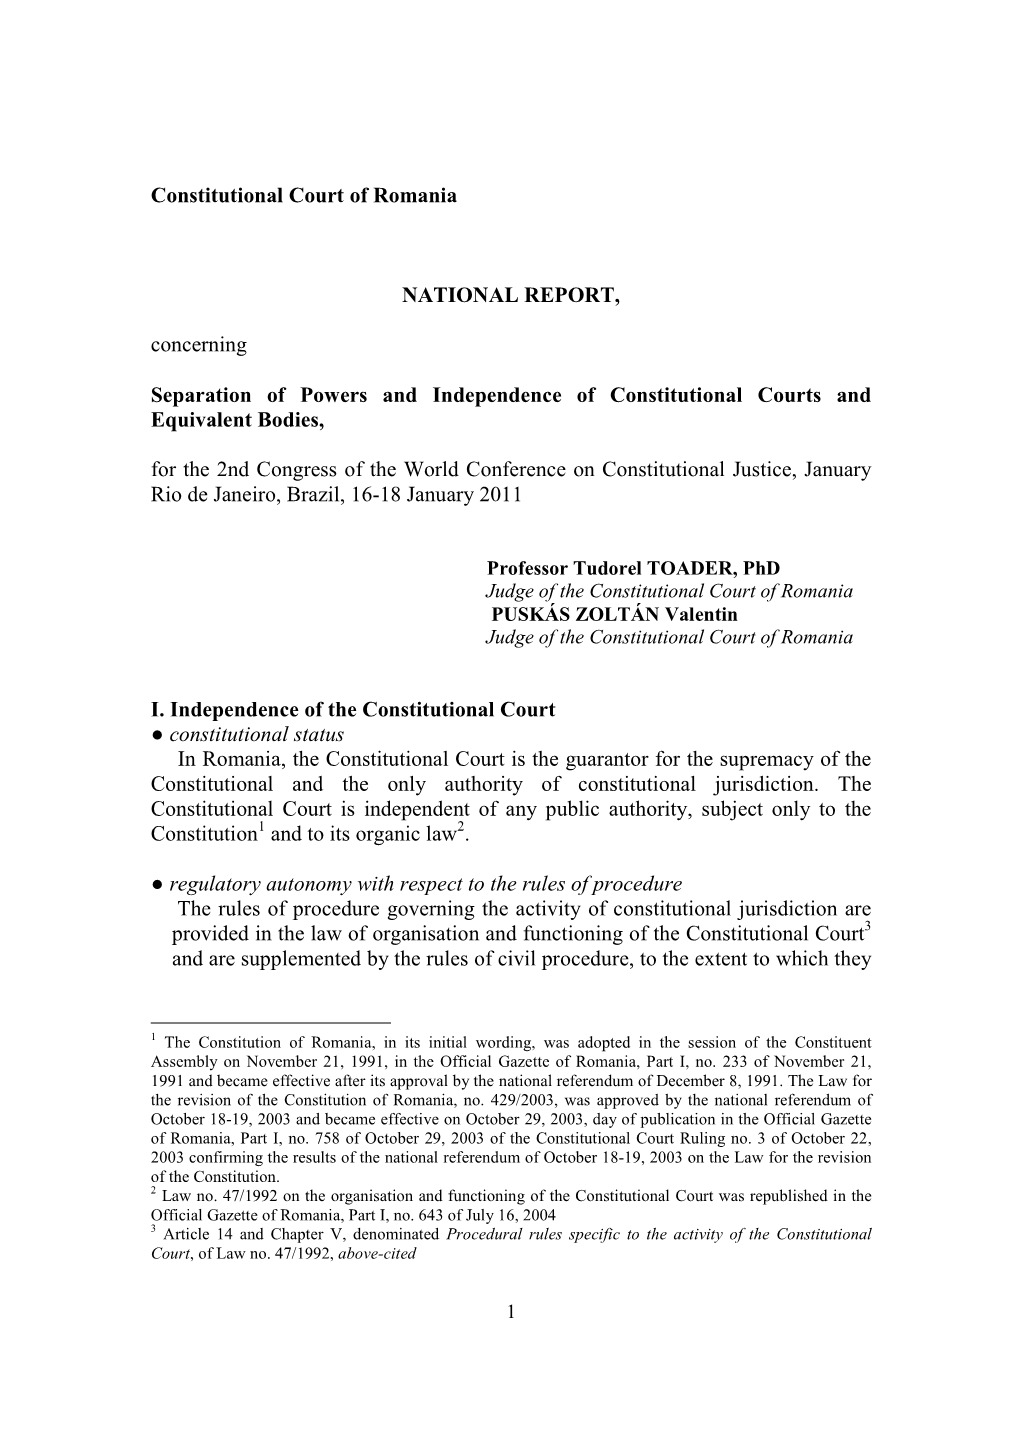 Constitutional Court of Romania NATIONAL REPORT, Concerning